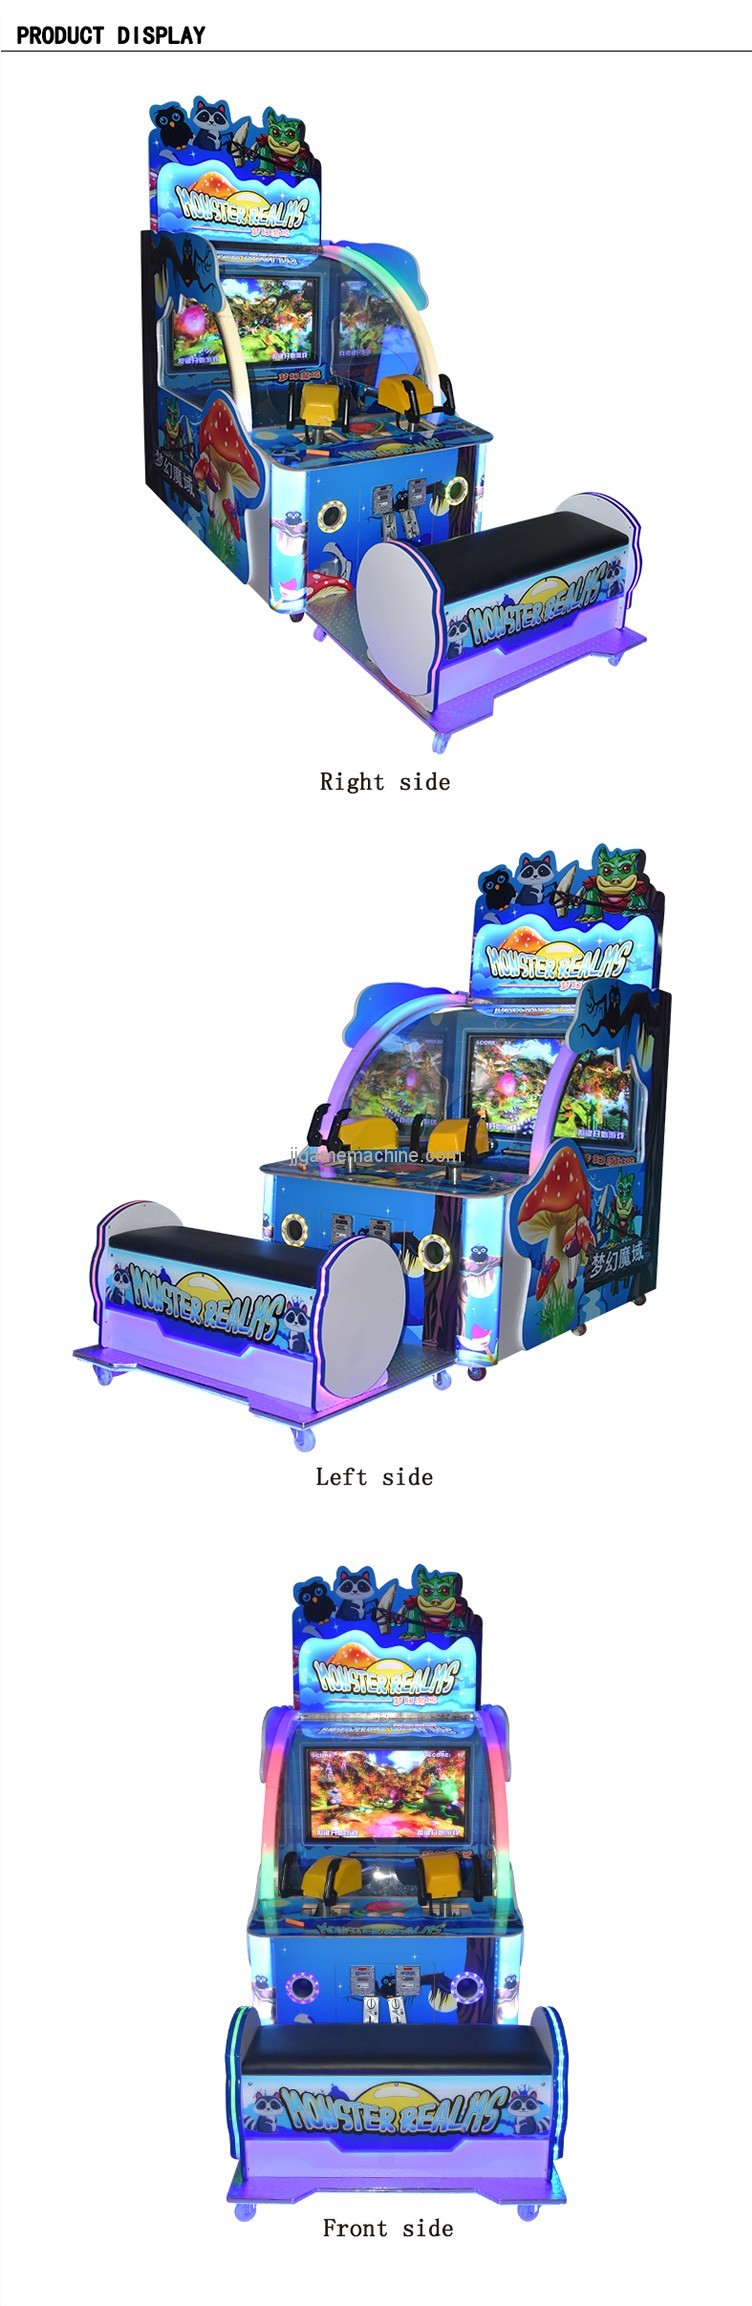 Hot-sell simulator coin operated arcade ball shooting game for kids